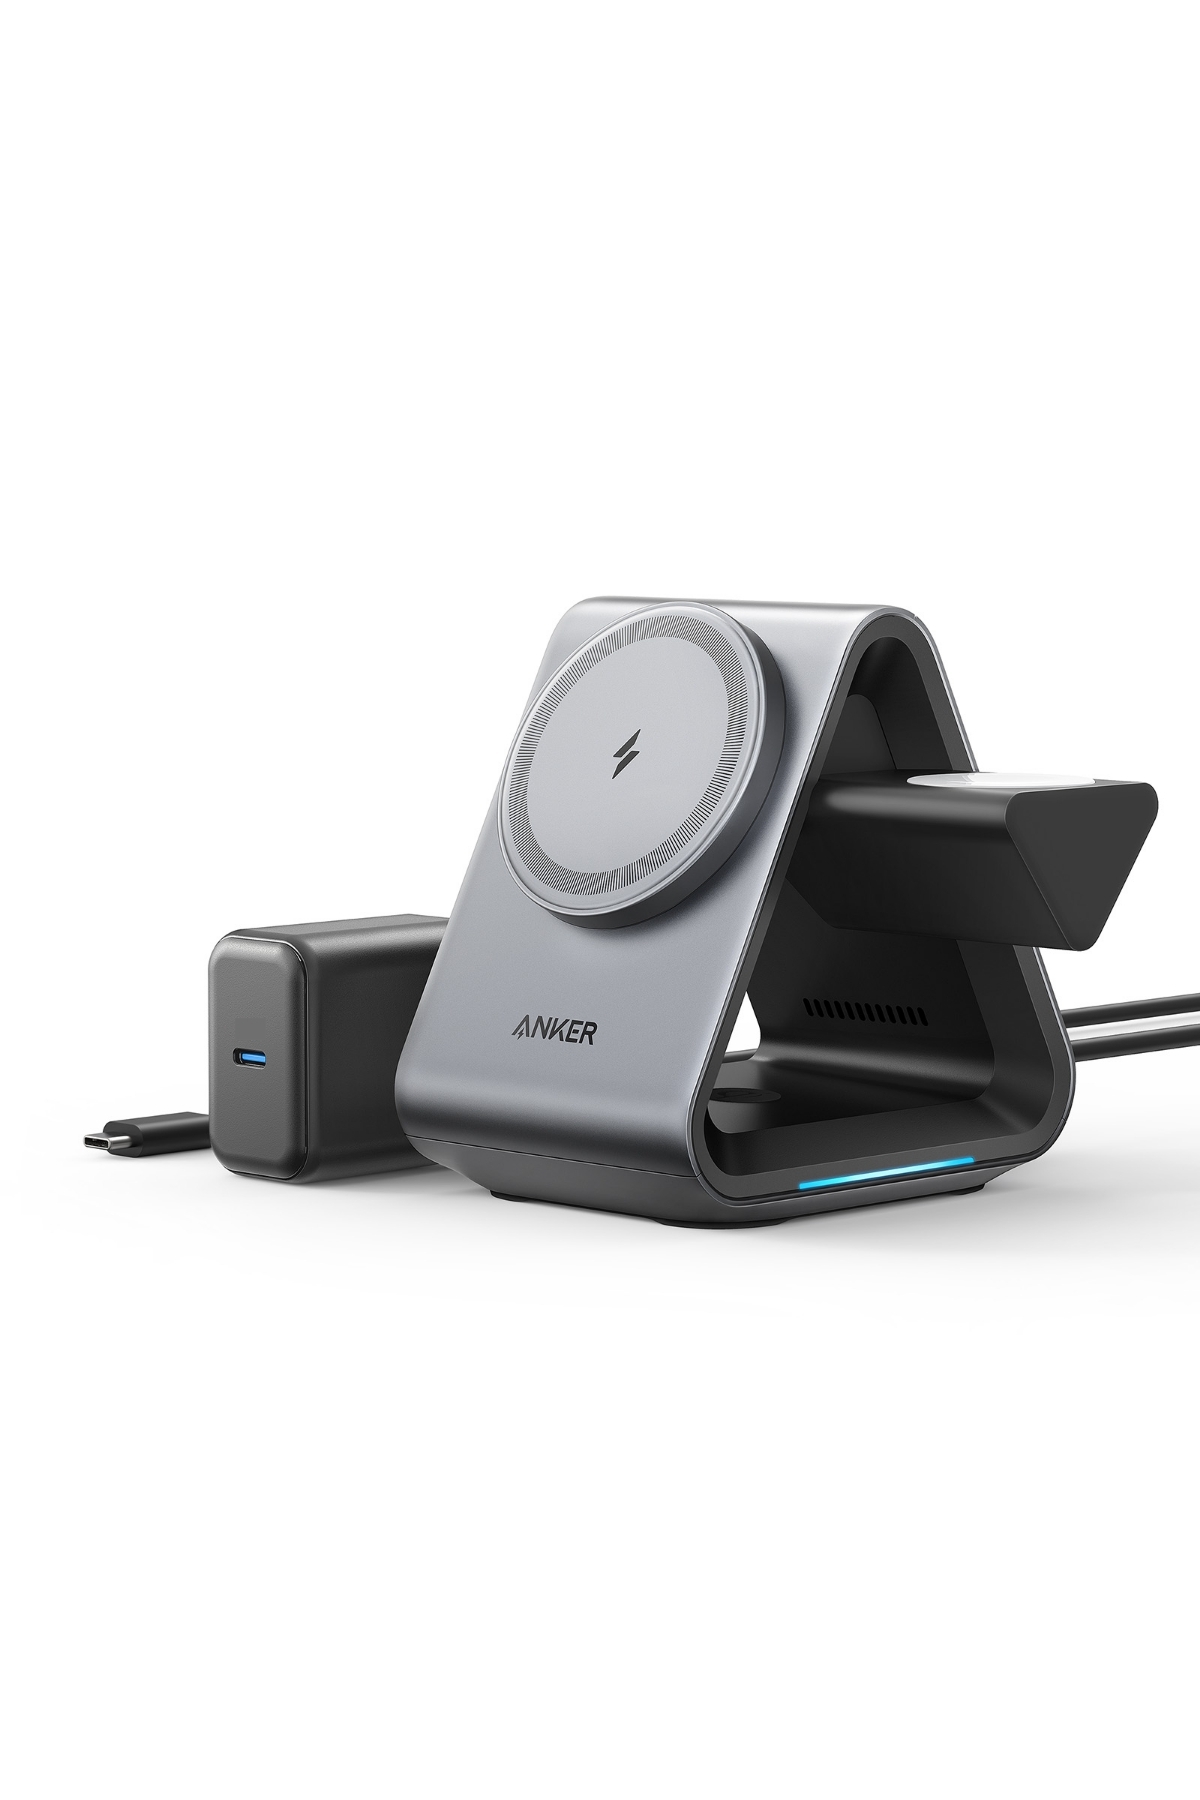 Anker 737 MagGo Charger (3-in-1 Station) (マグネット式 3-in-1